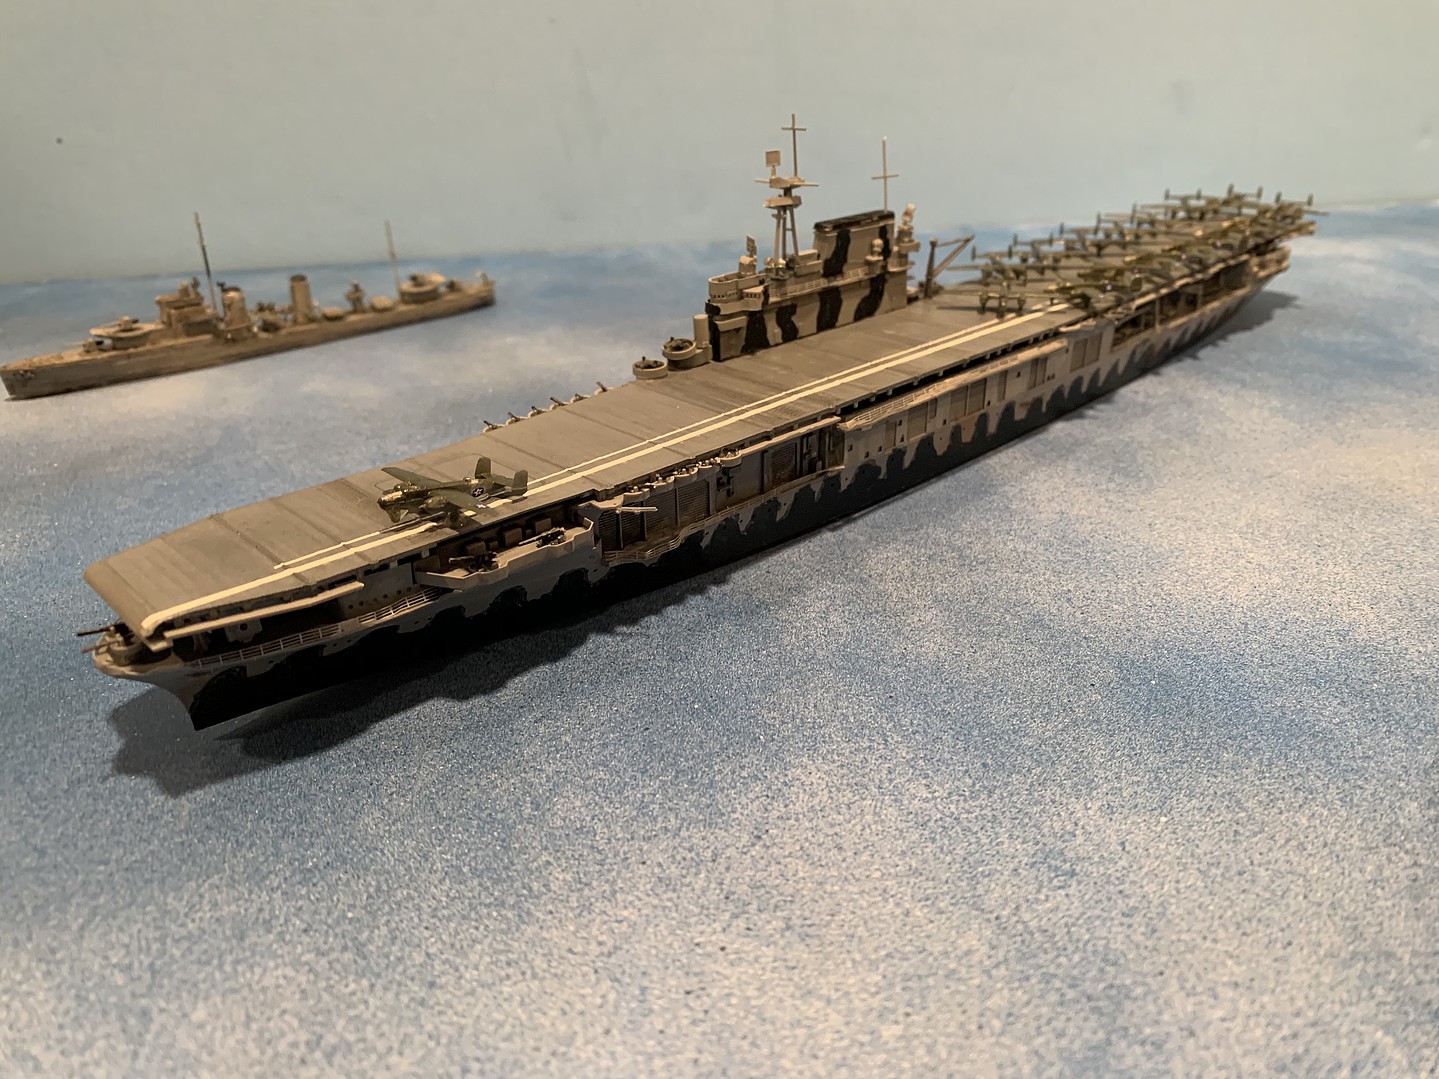 Gallery Pictures Tamiya Uss Hornet Aircraft Carrier Waterline Plastic Model Military Ship Kit